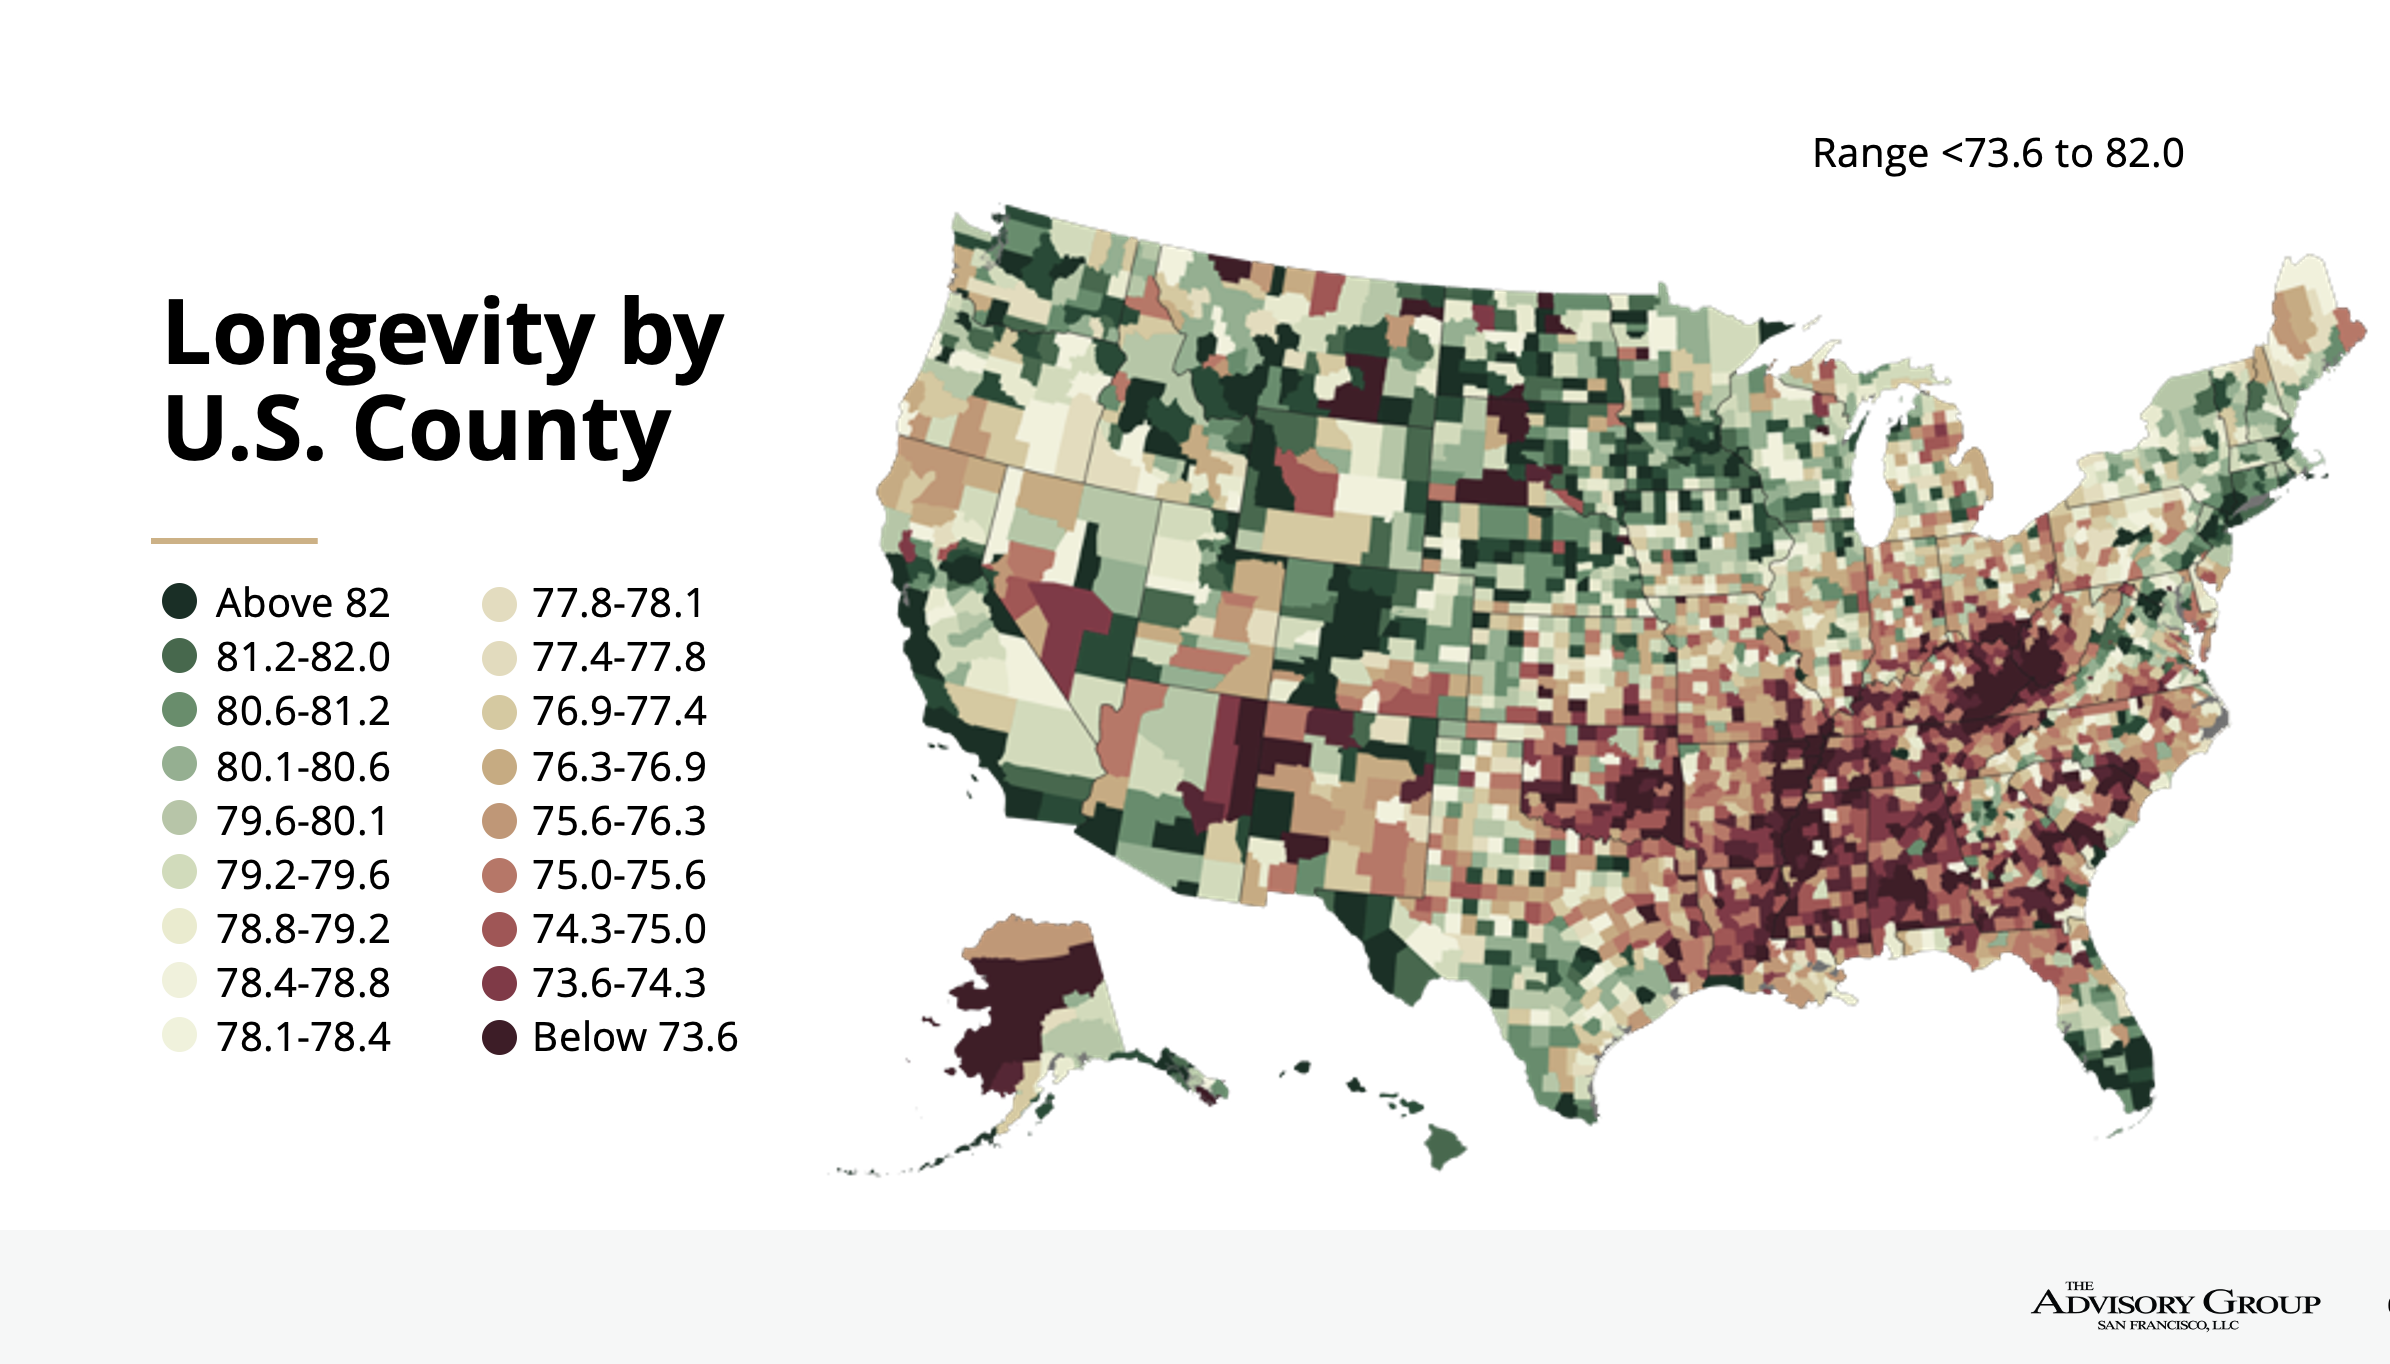 Longevity by region in the United States